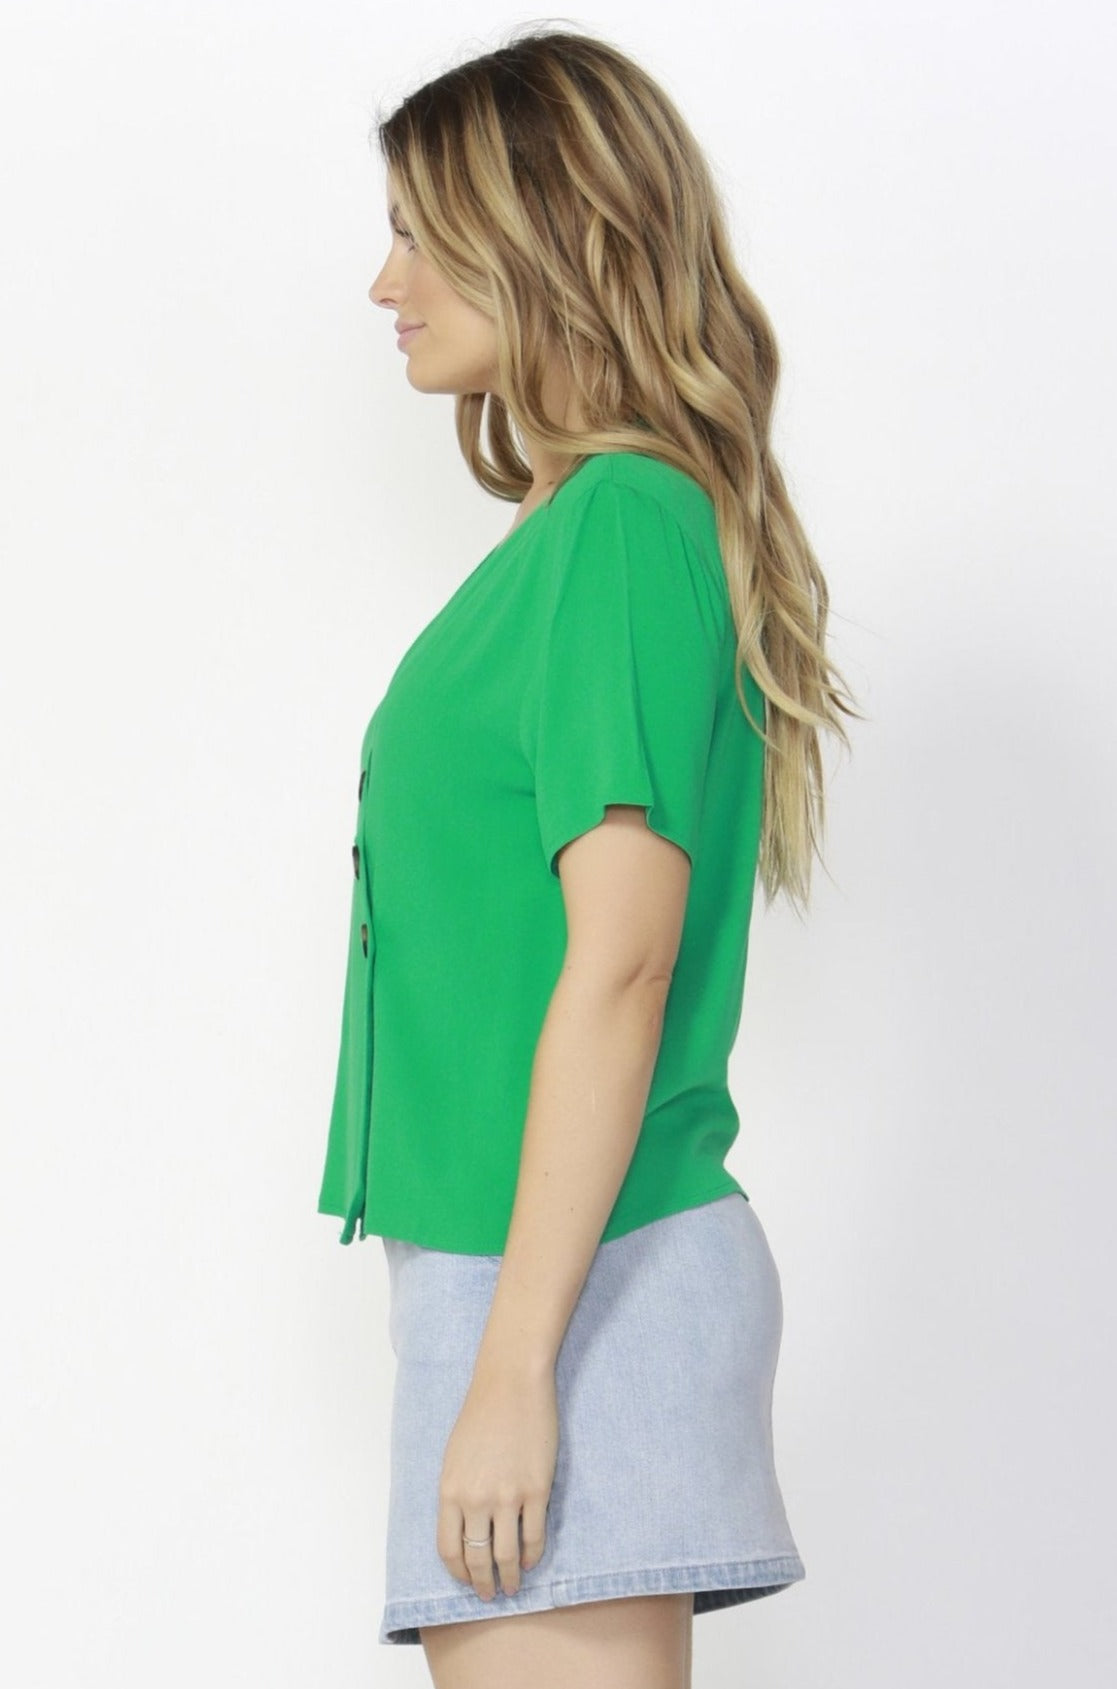 Sass Catching Rays Blouse in Palm Green - Hey Sara